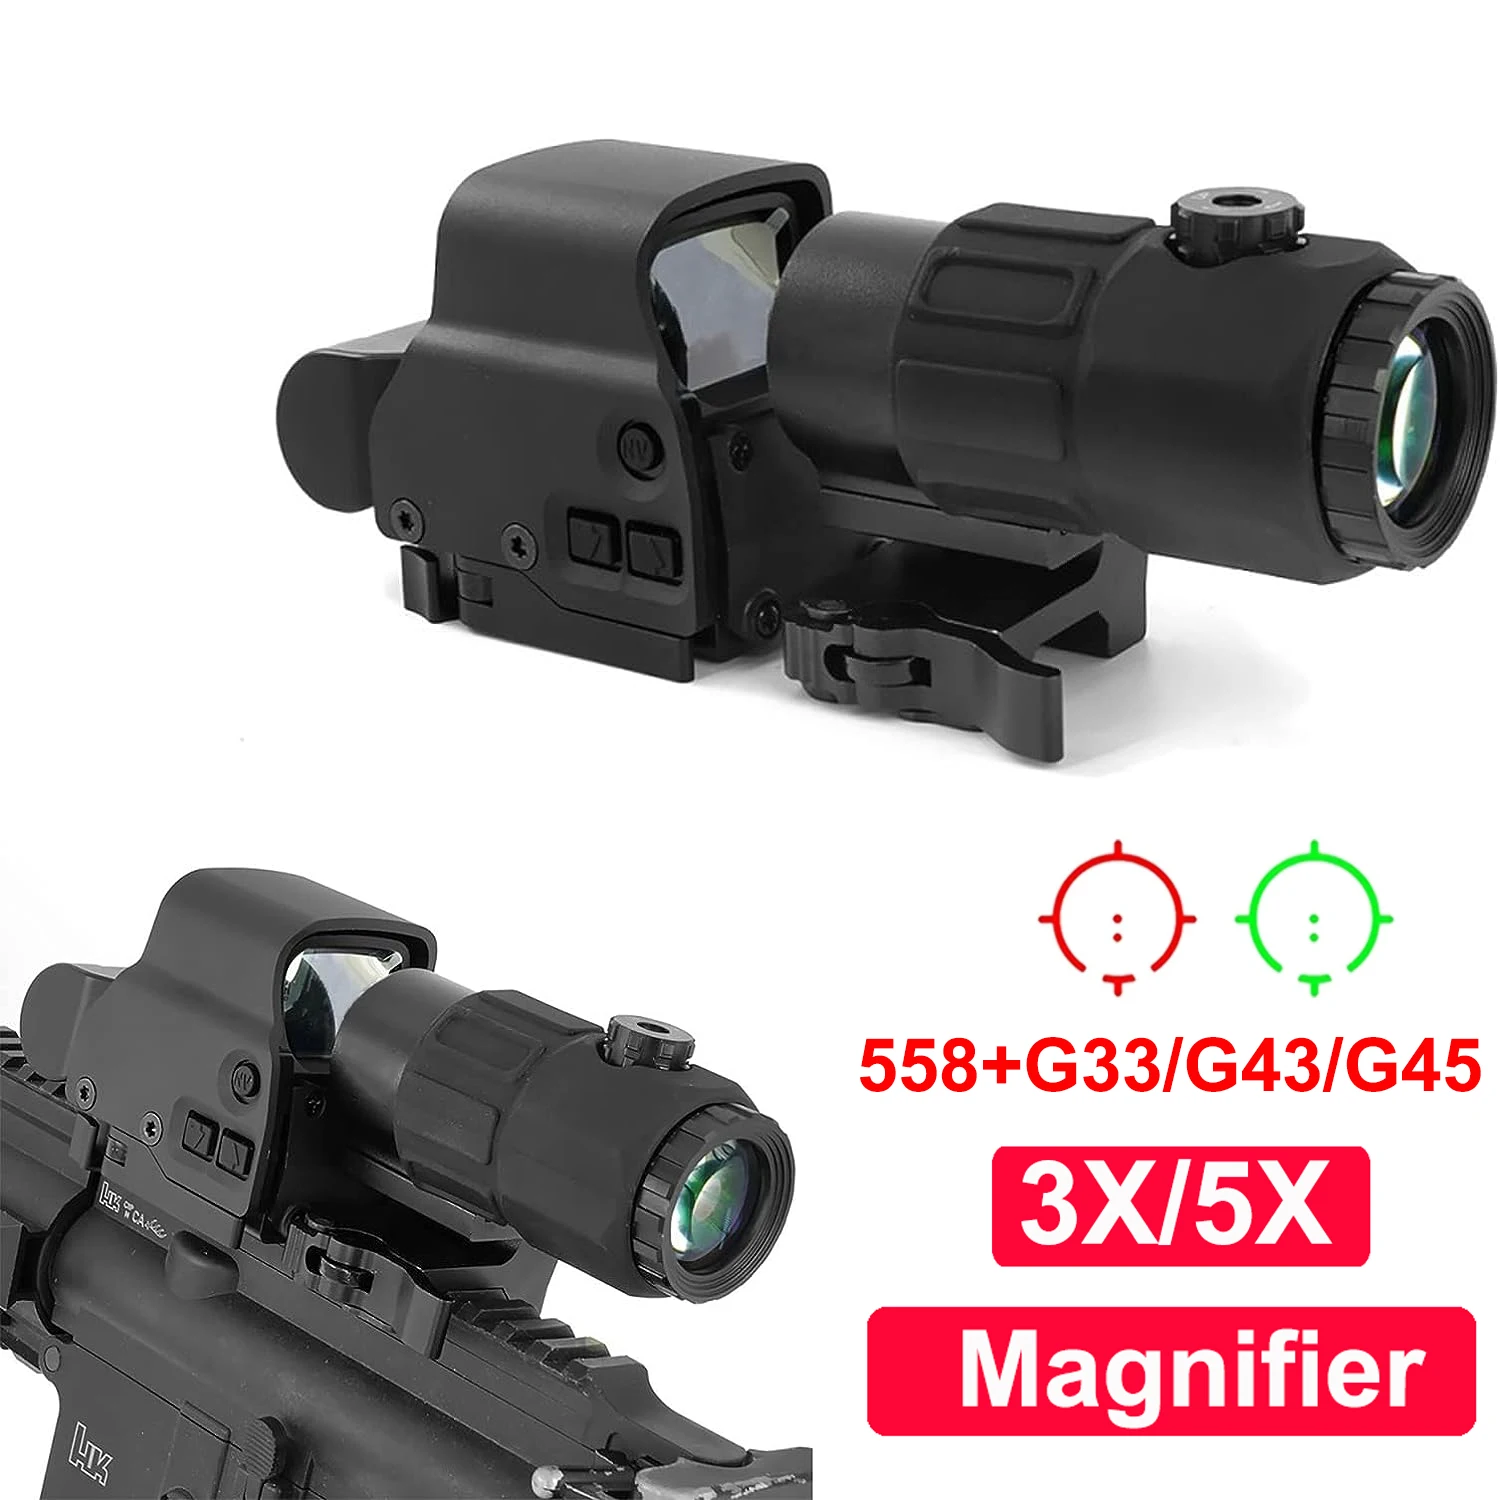 

558 G33 G43 Holographic Collimator Reflex Sight EXPS3 Red Dot Optics Scope Fit 20mm Rail Mounts for Airsoft Sniper Rifle Hunting